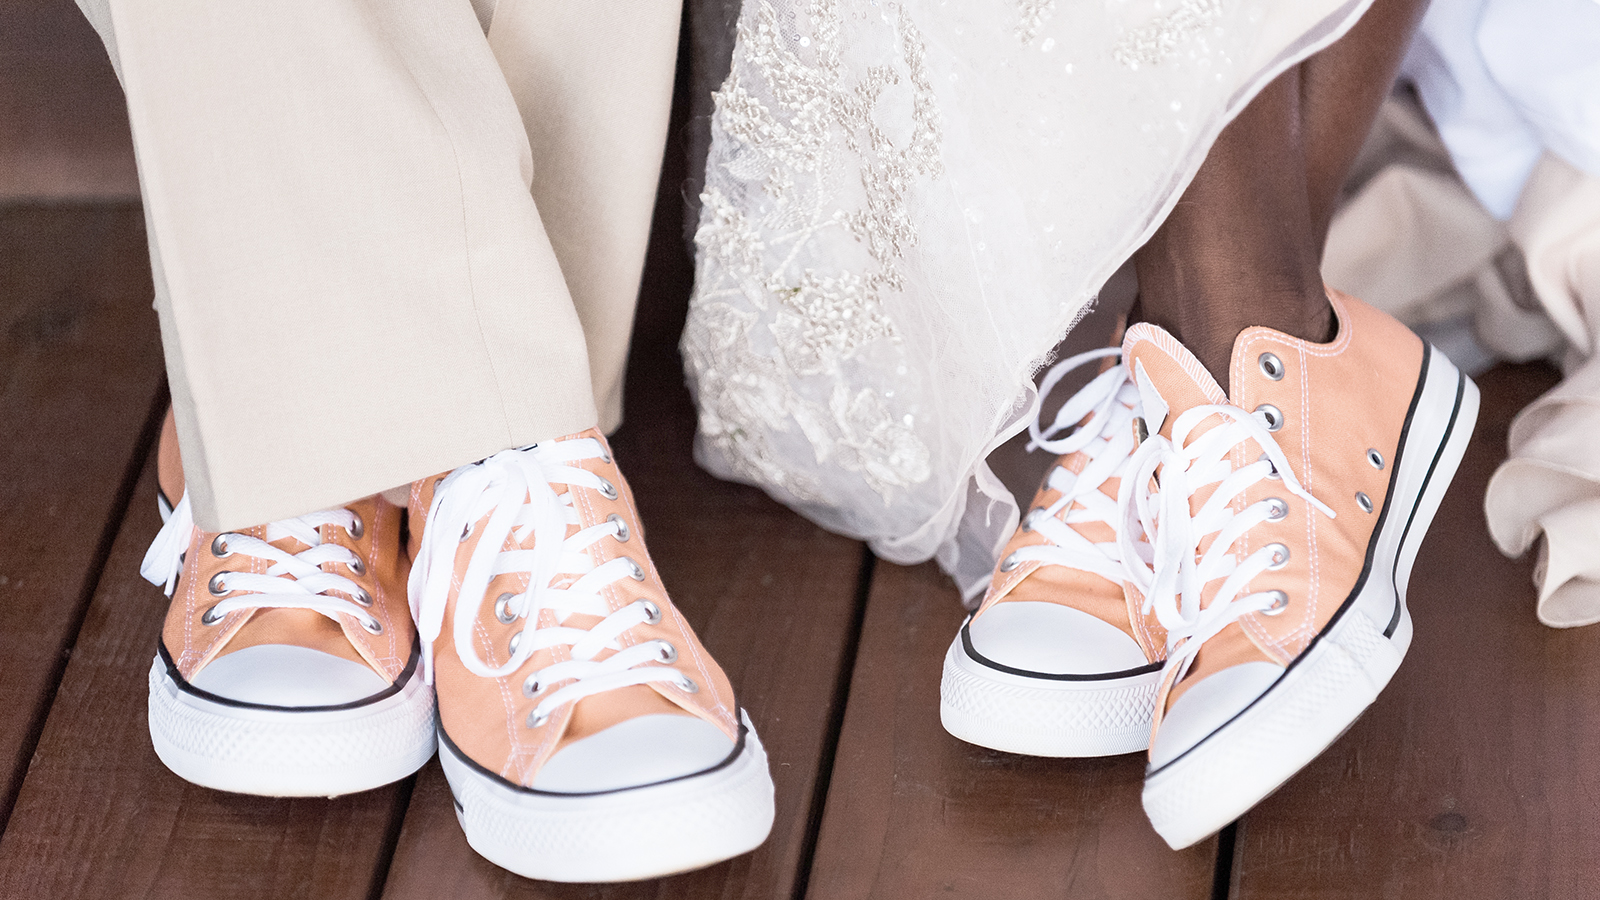 Peach Colored Wedding Shoes for both Bride and Groom